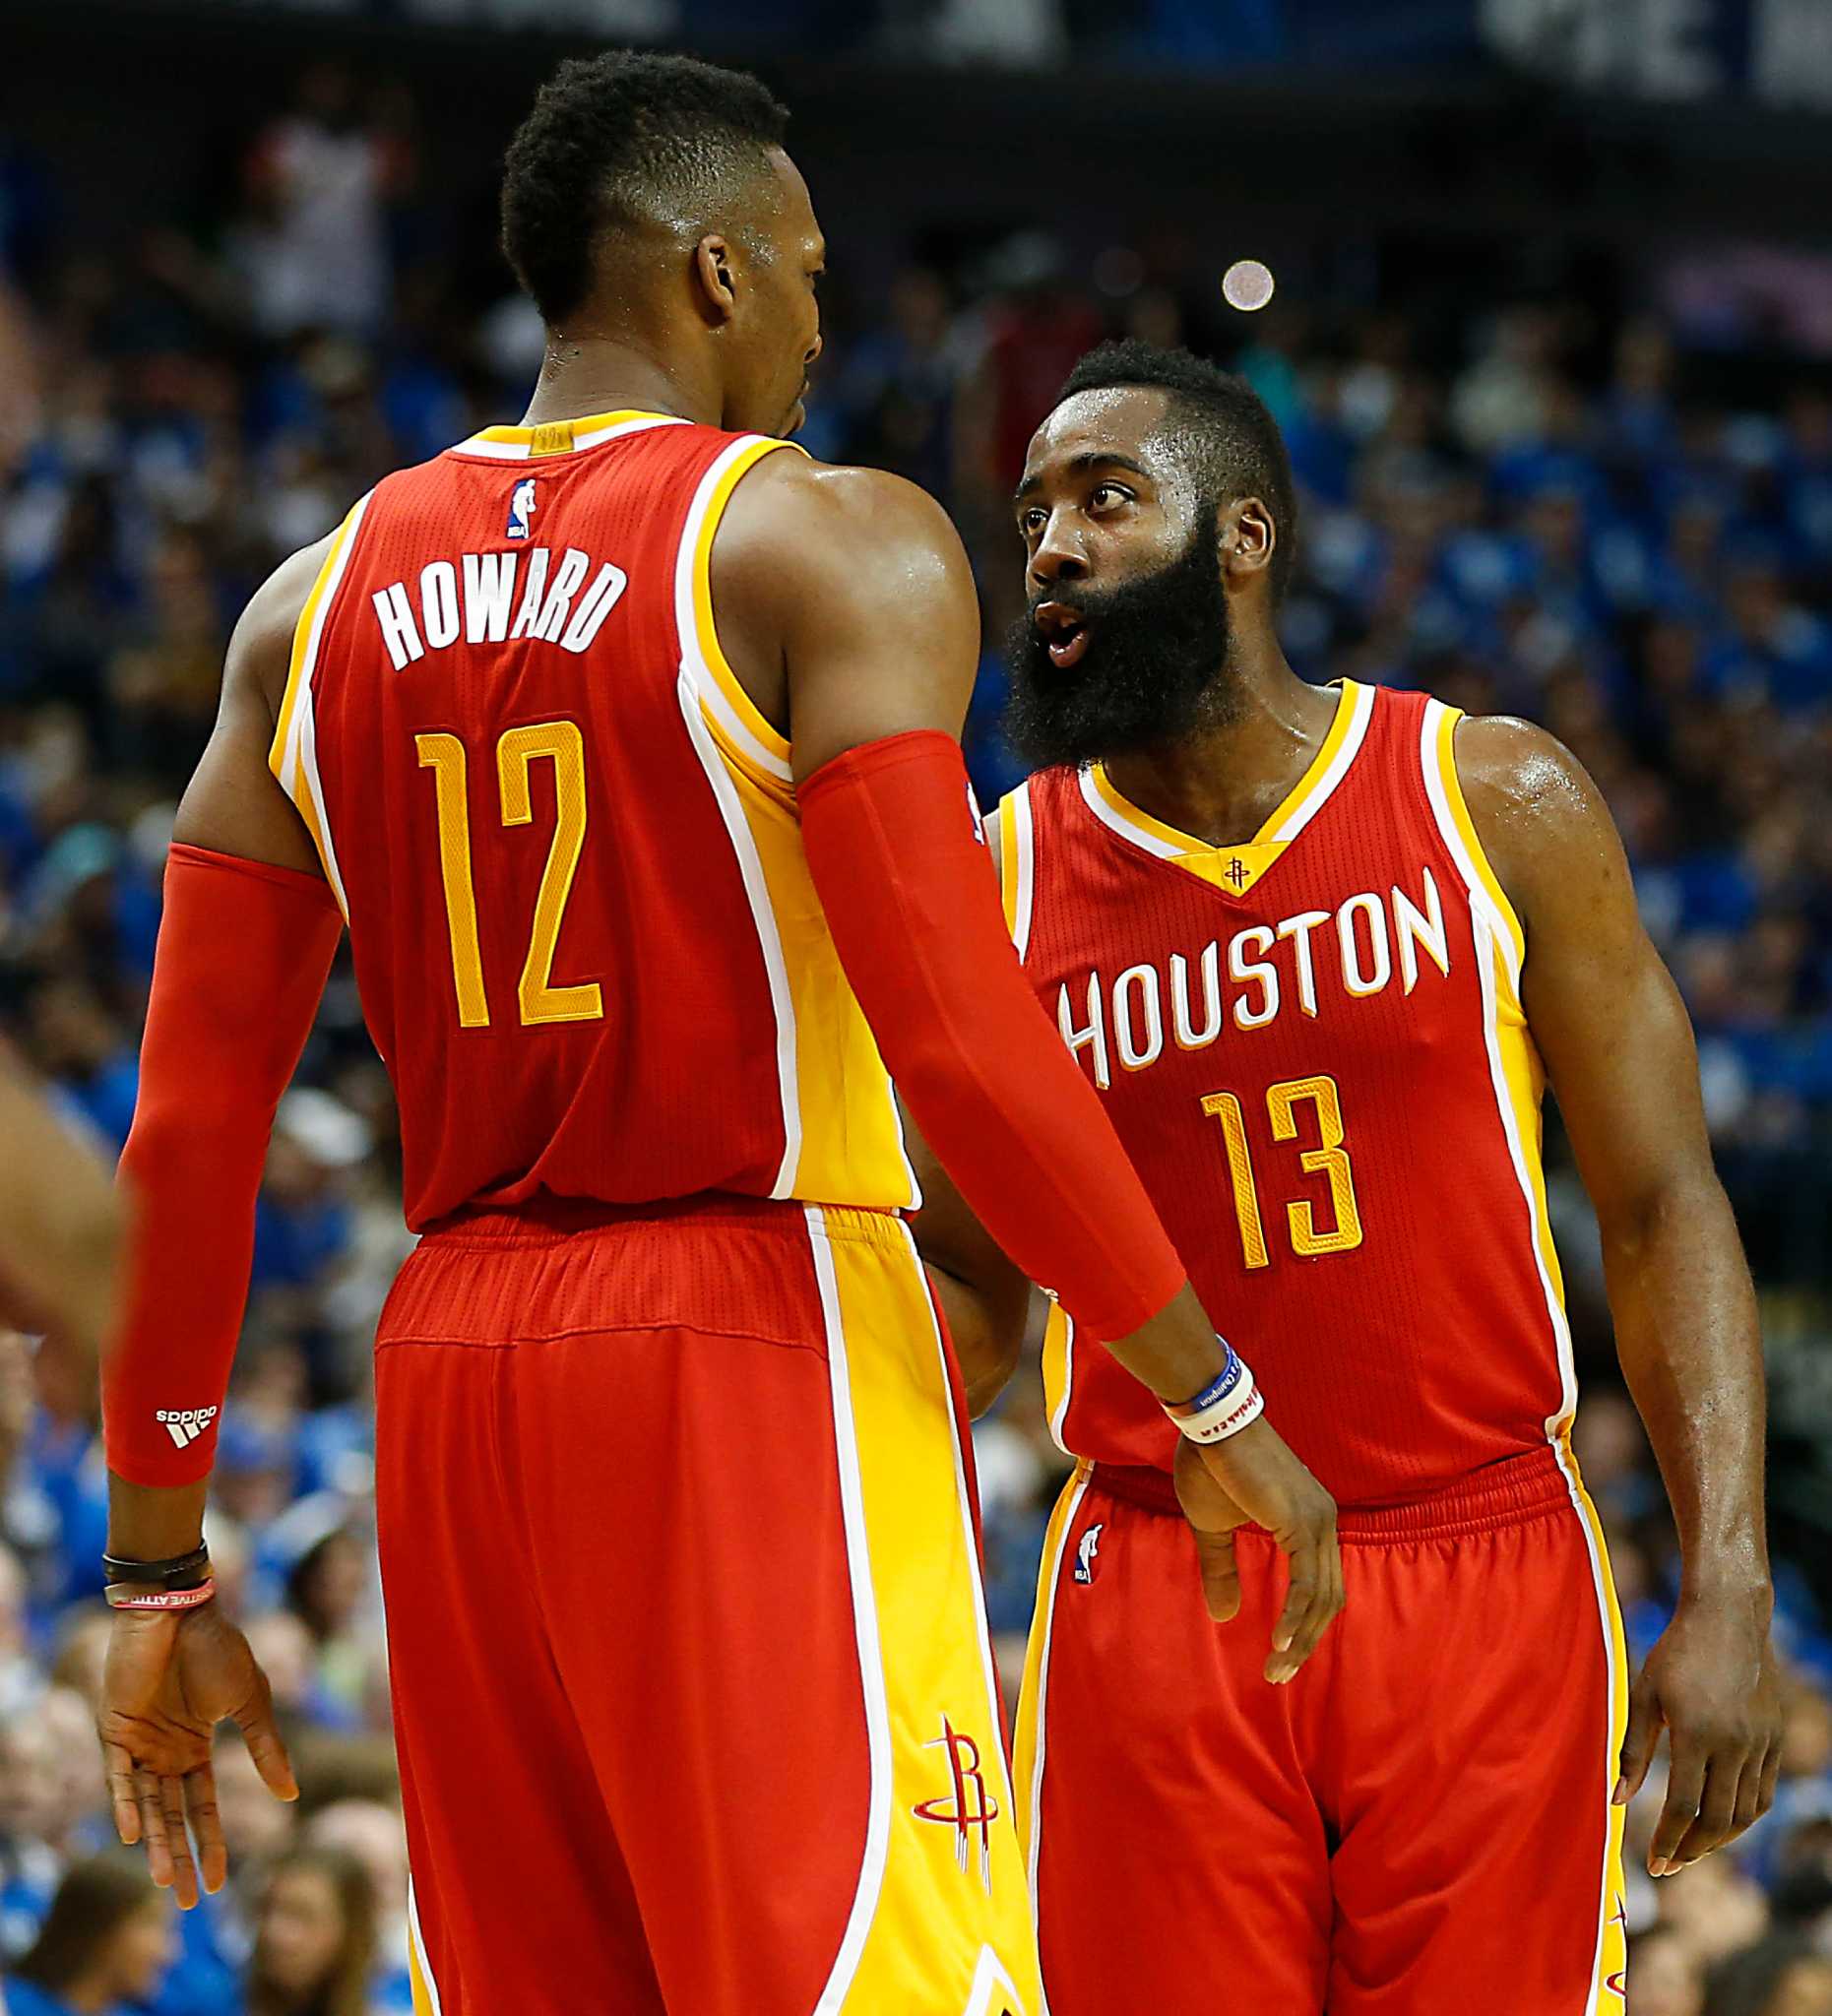 James Harden Is The Villain the NBA Playoffs Need